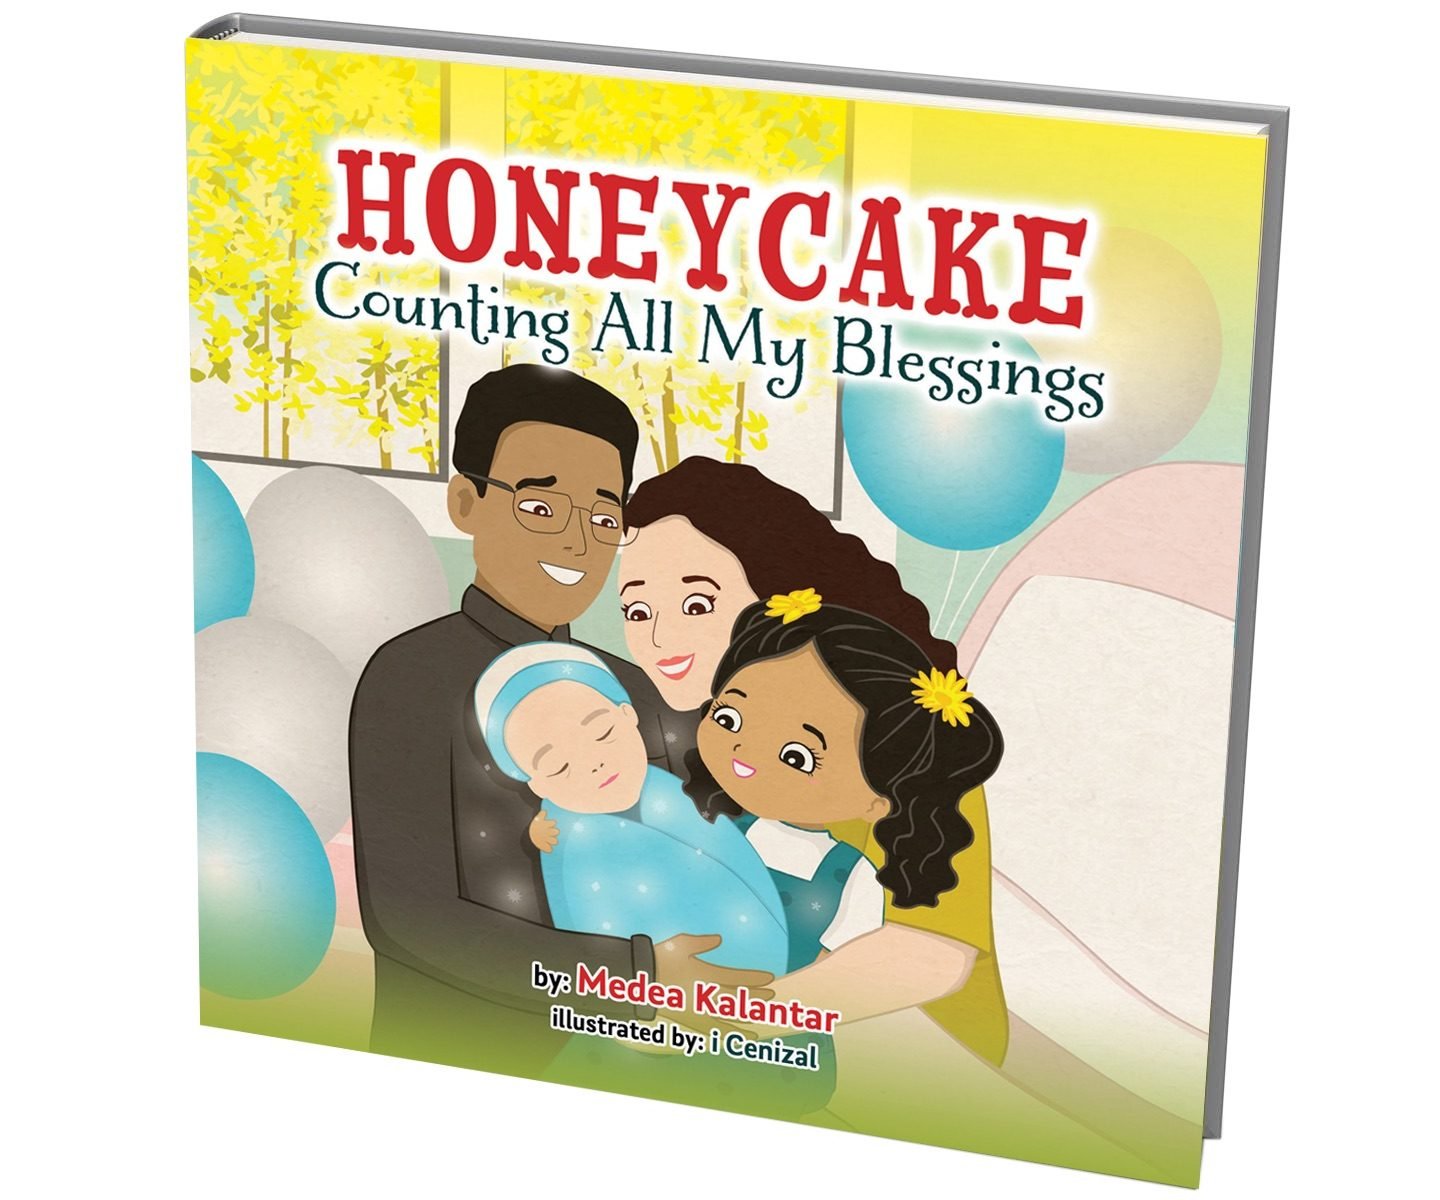 Book 5: Honeycake-Counting All My Blessings